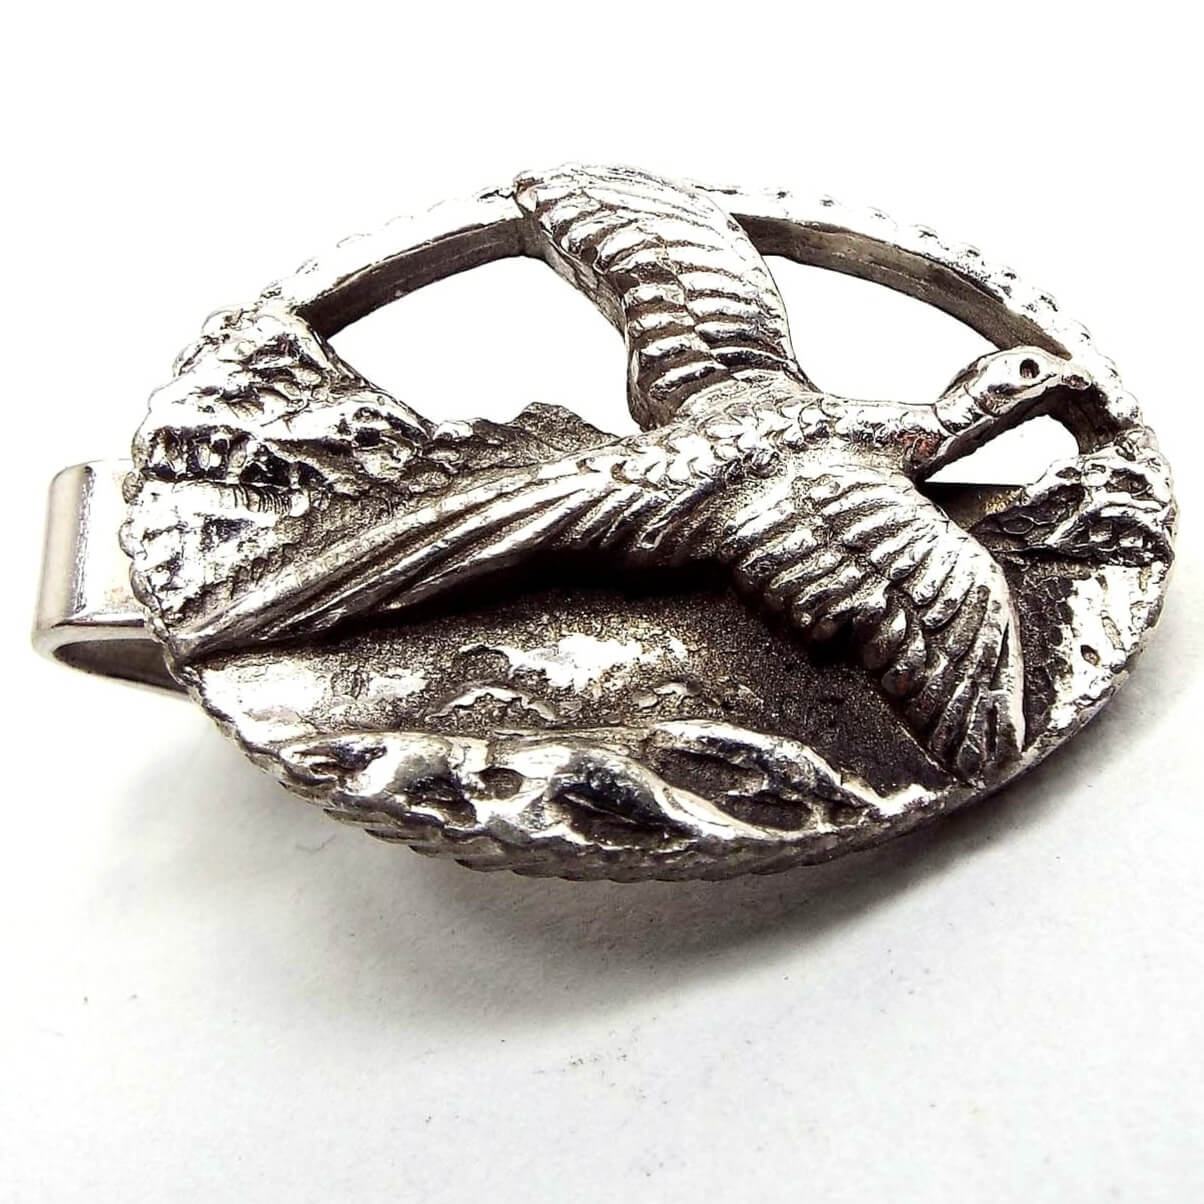 Front view of the retro vintage pheasant tie clip. It is silver tone and oval in shape. There is a raised and detailed design of a pheasant flying with what looks to be mountains in the background.